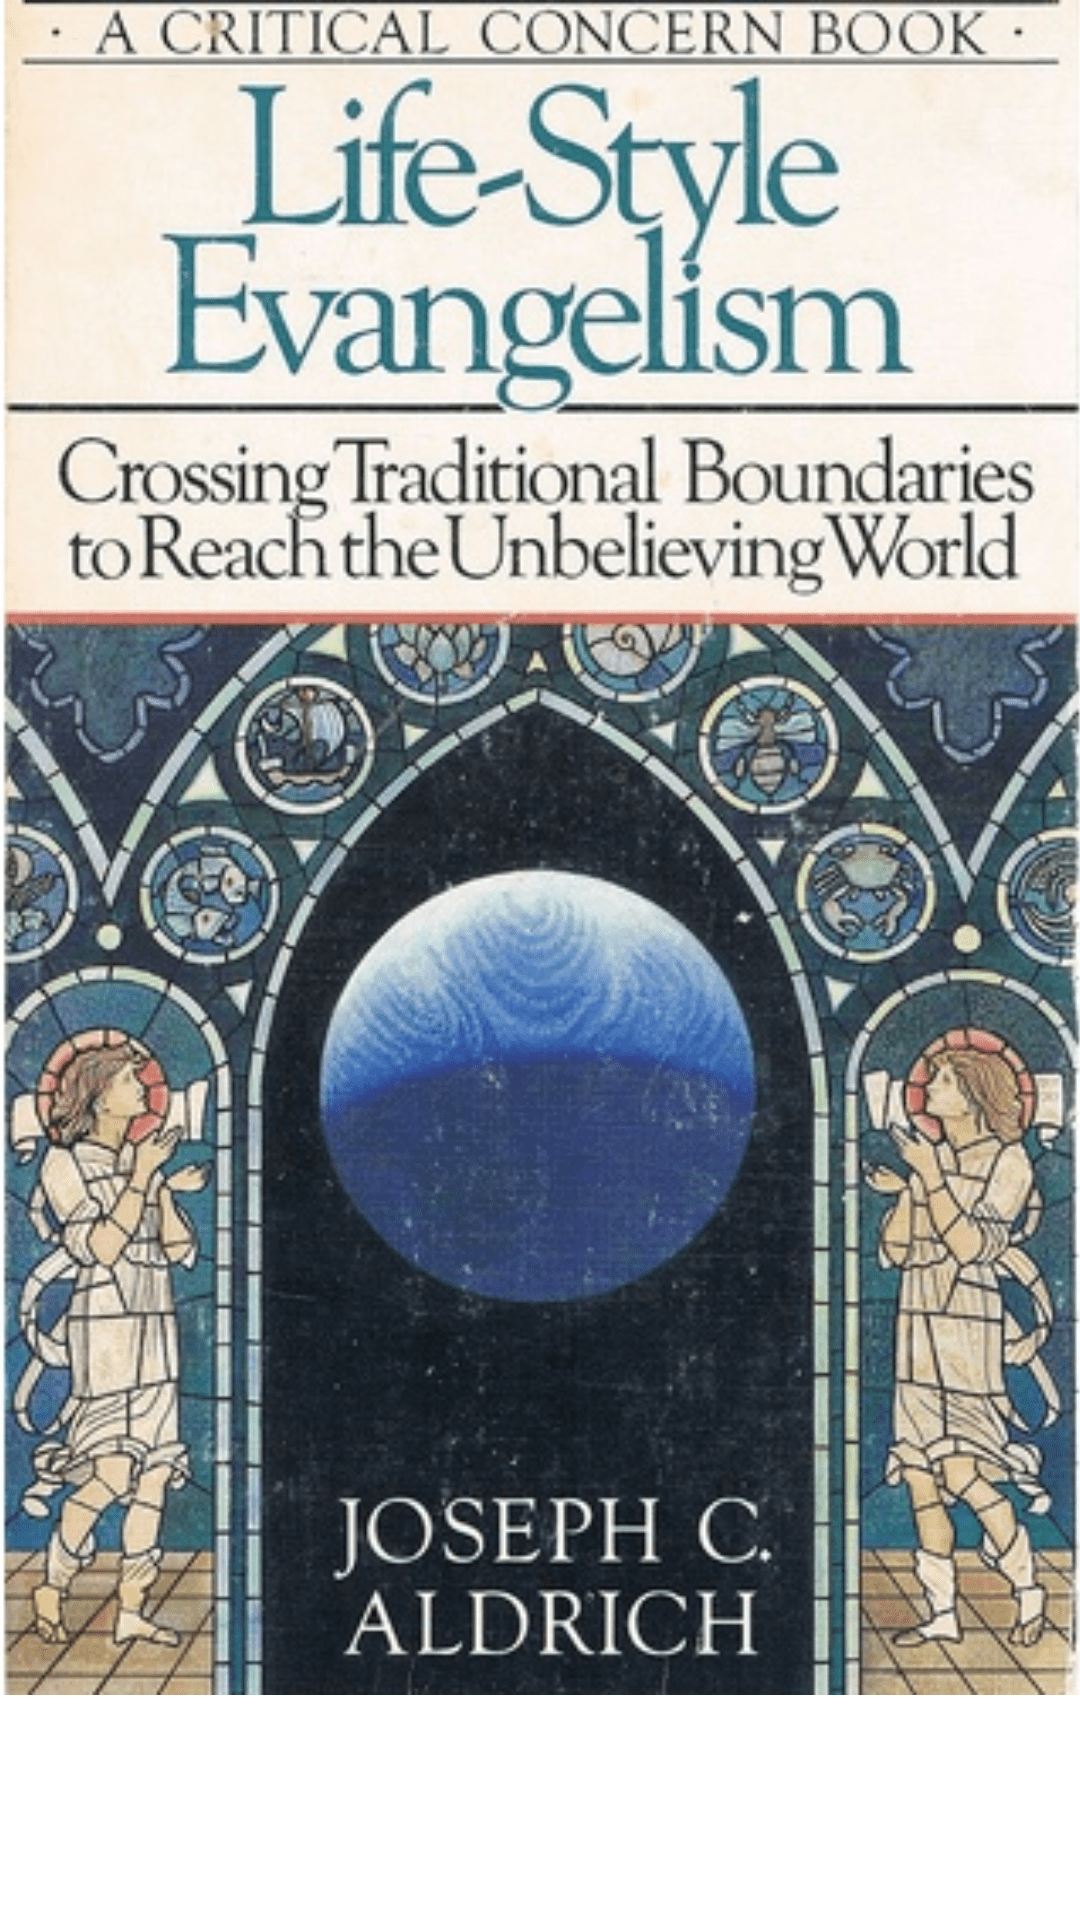 Life Style Evangelism: Crossing Traditional Boundaries to Reach the Unbelieving World